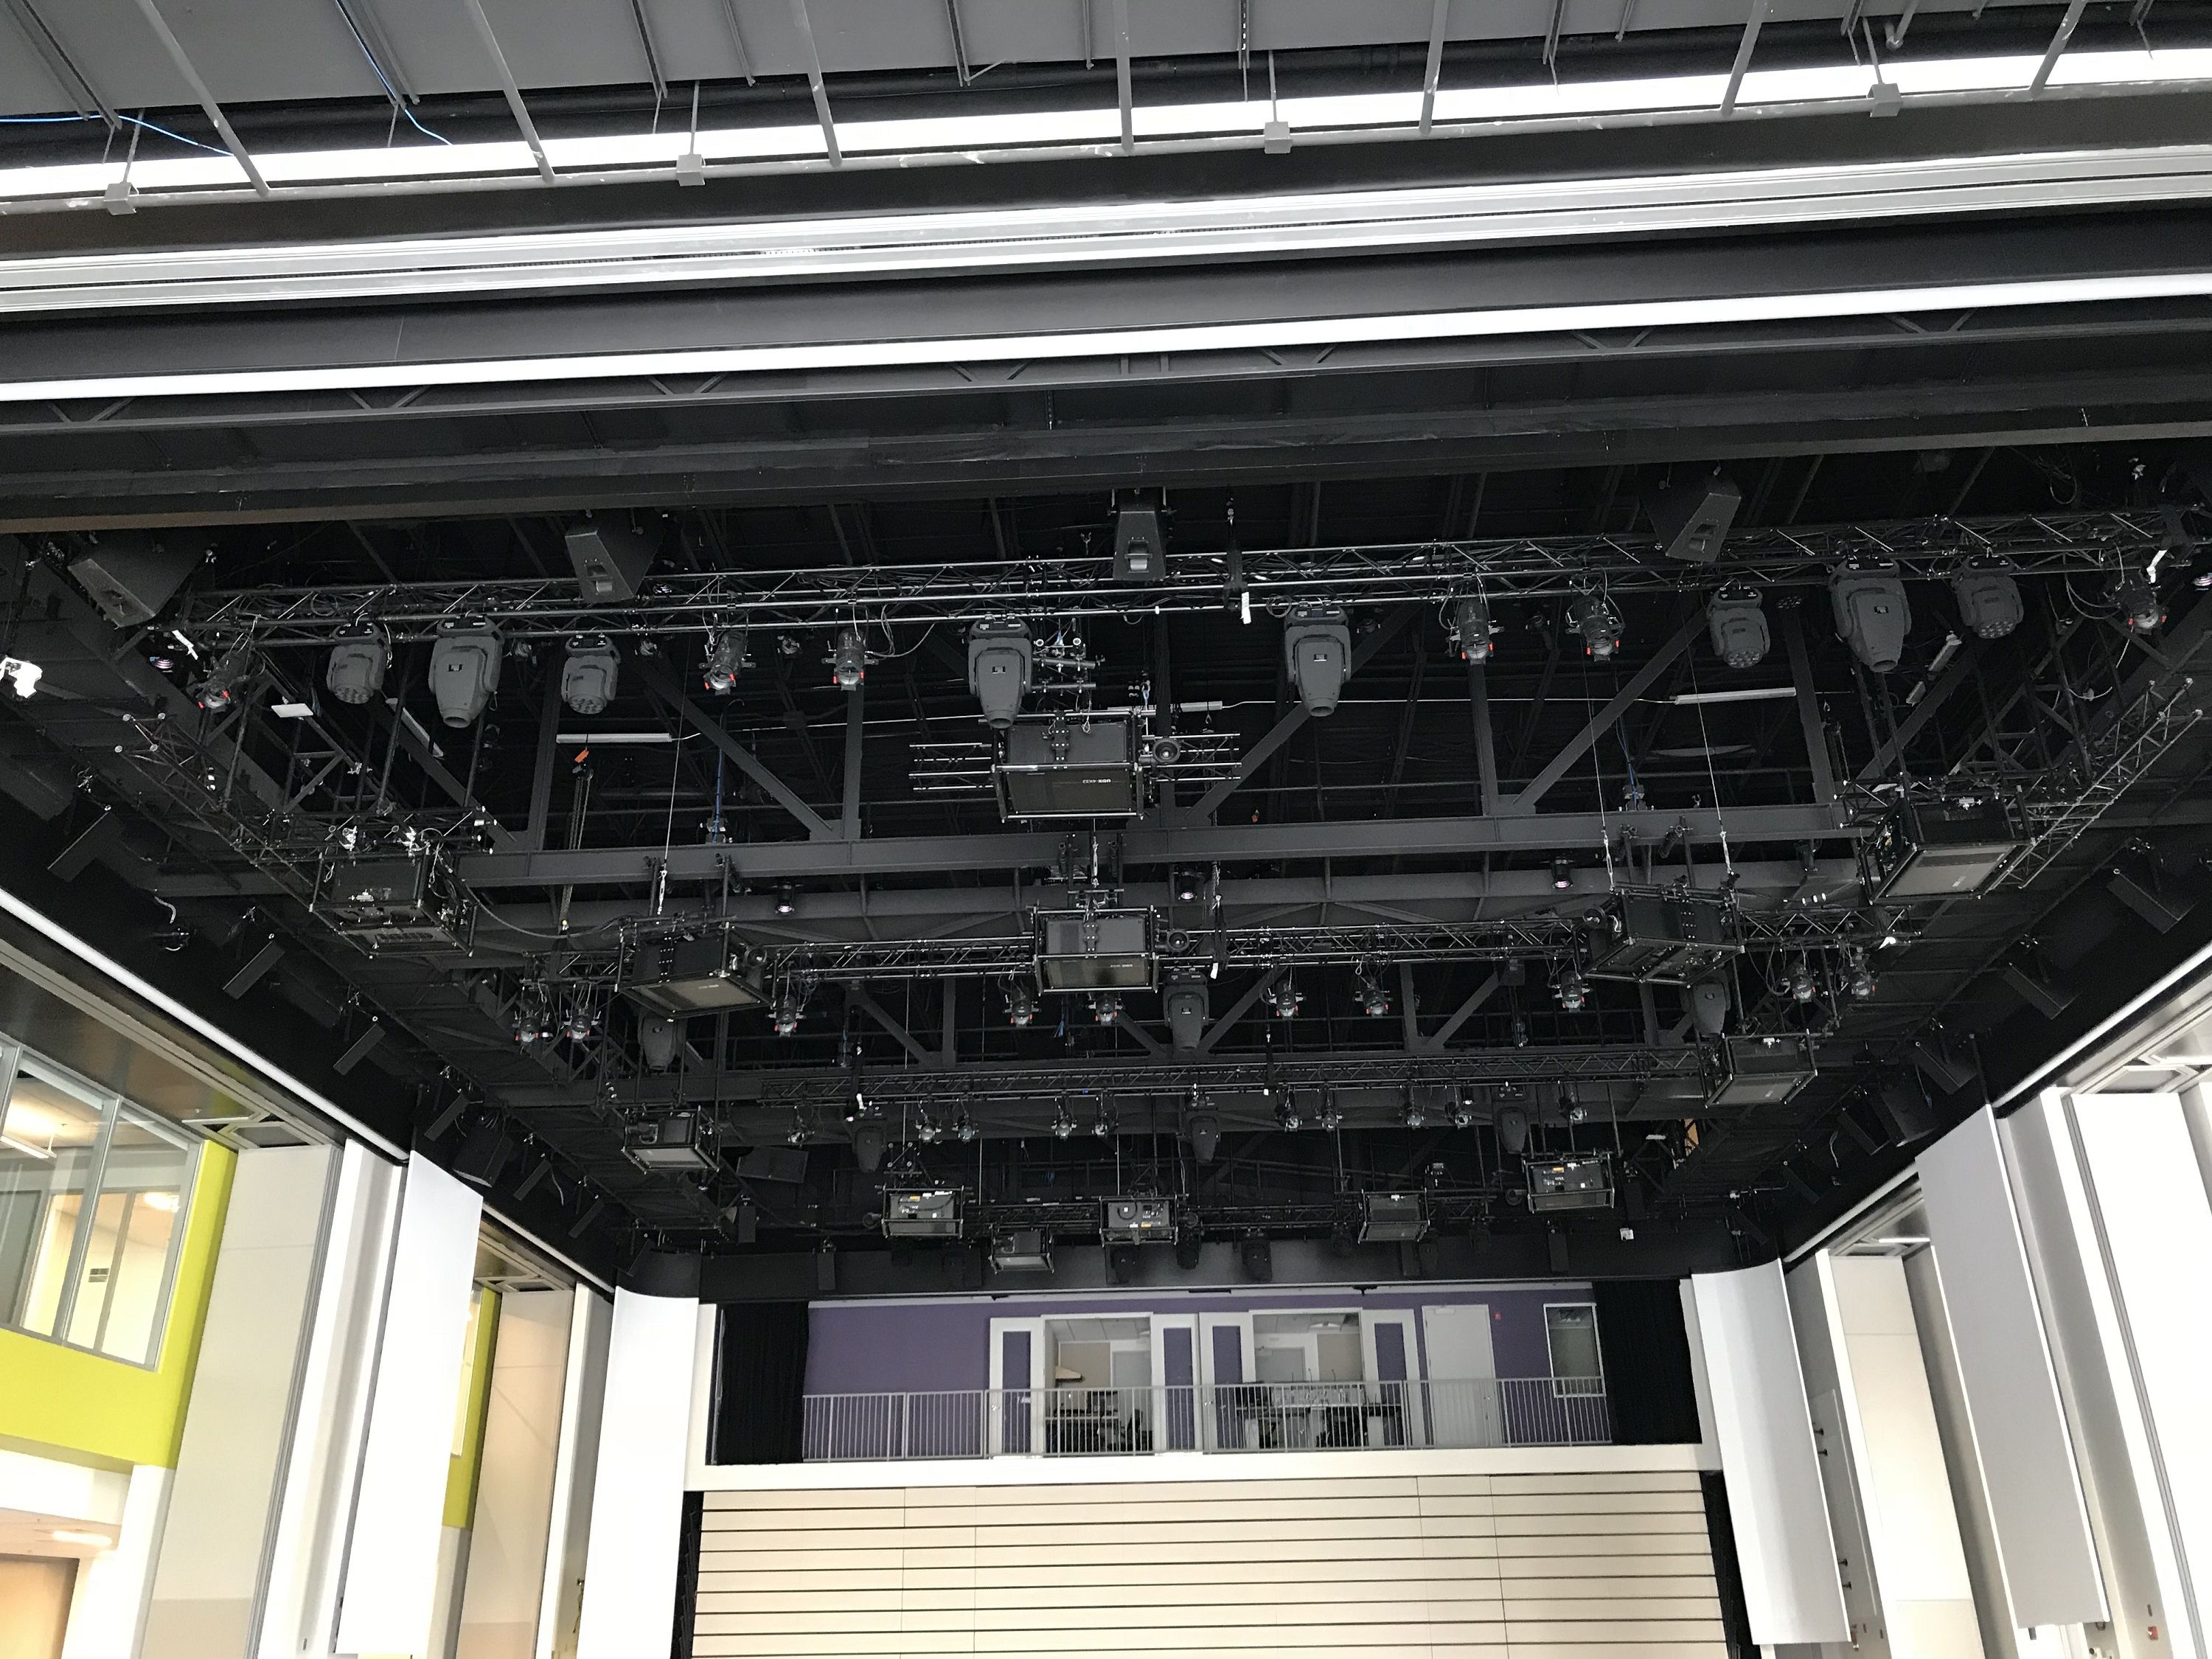 La Cité’s new Excentricité building features close to 50 loudspeakers for the immersive audio experience. Digital 6000 was the microphone system of choice to keep feedback to a minimum
(Image courtesy of La Cité Collégiale)